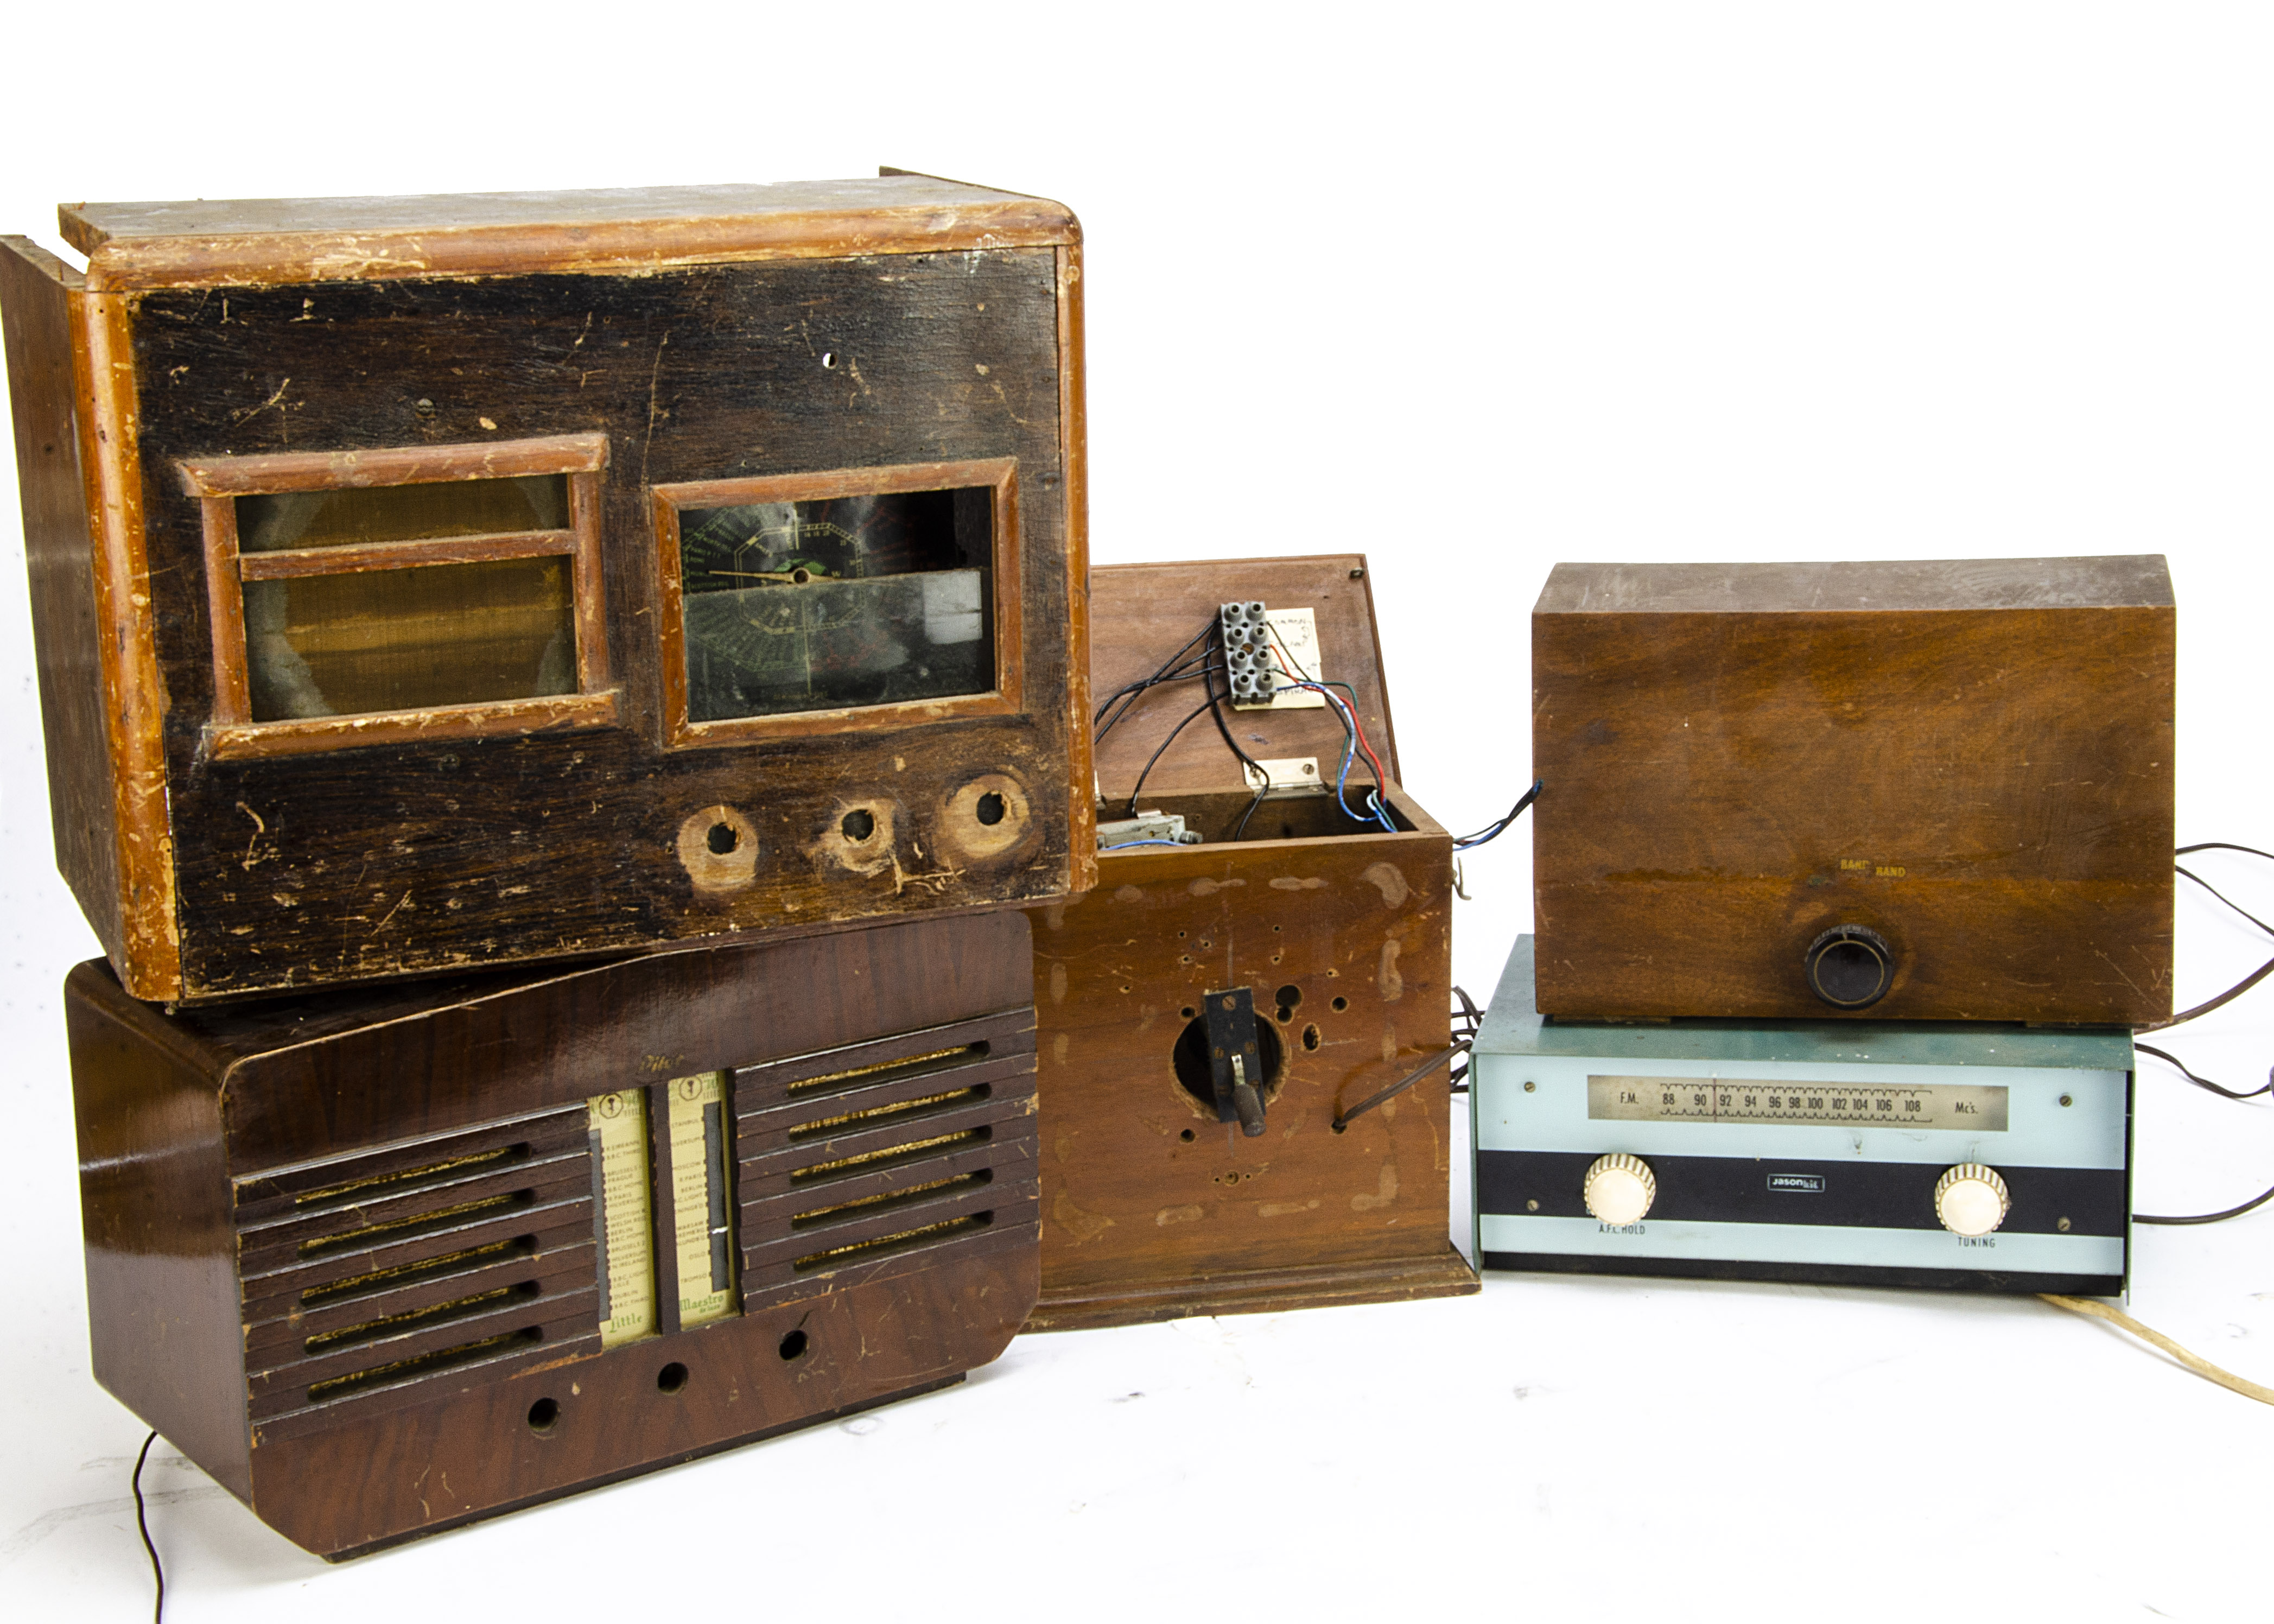 Radios / Valve / Parts, two large boxes containing a variety of old radios, many without whole cases